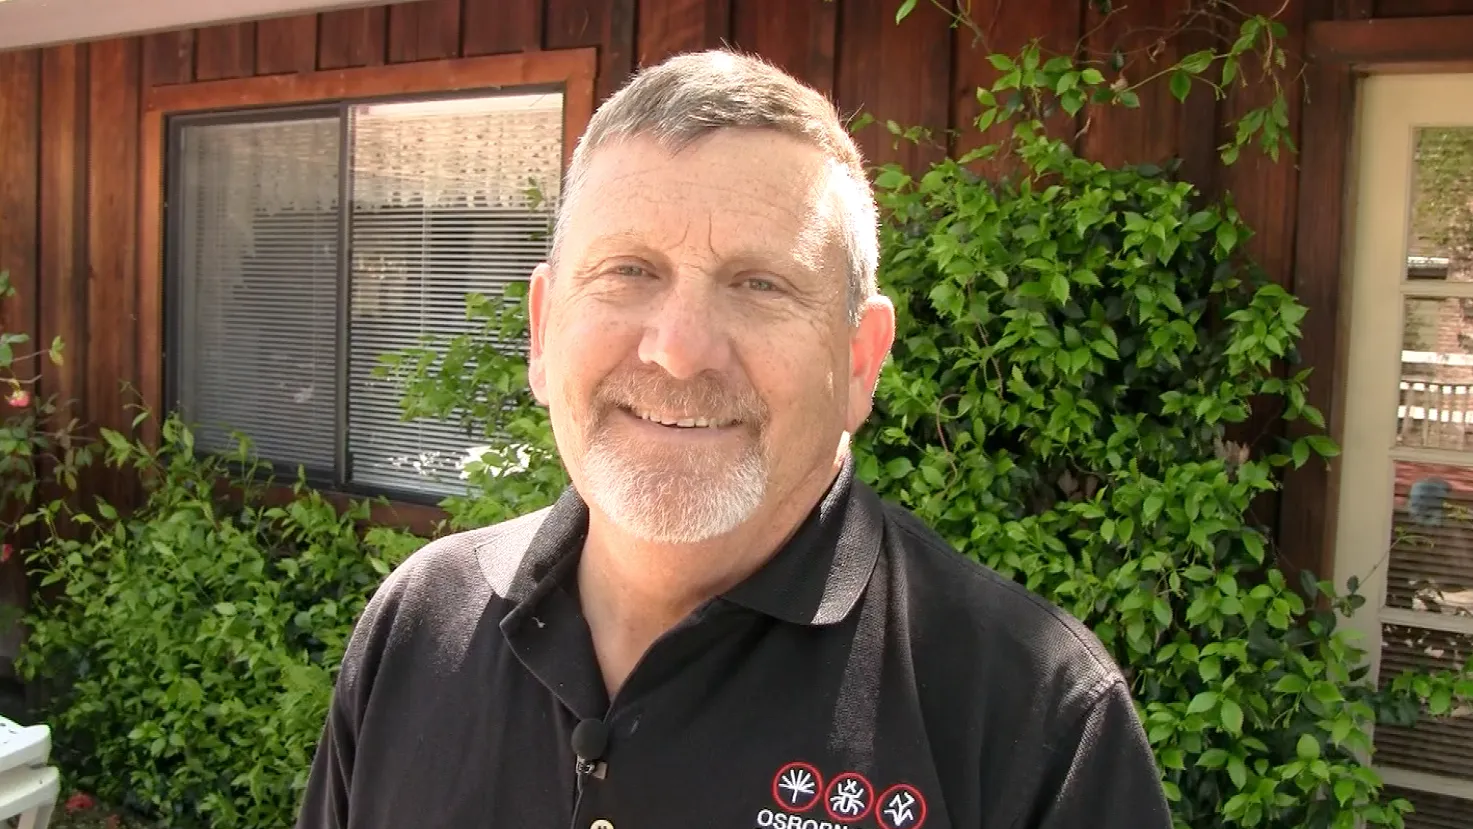 David Osborn is a 35-year veteran of the pest control industry and owner of Osborn Spray Service, a Diamond Certified company since 2007. He can be reached at (925) 405-6964 or by email.